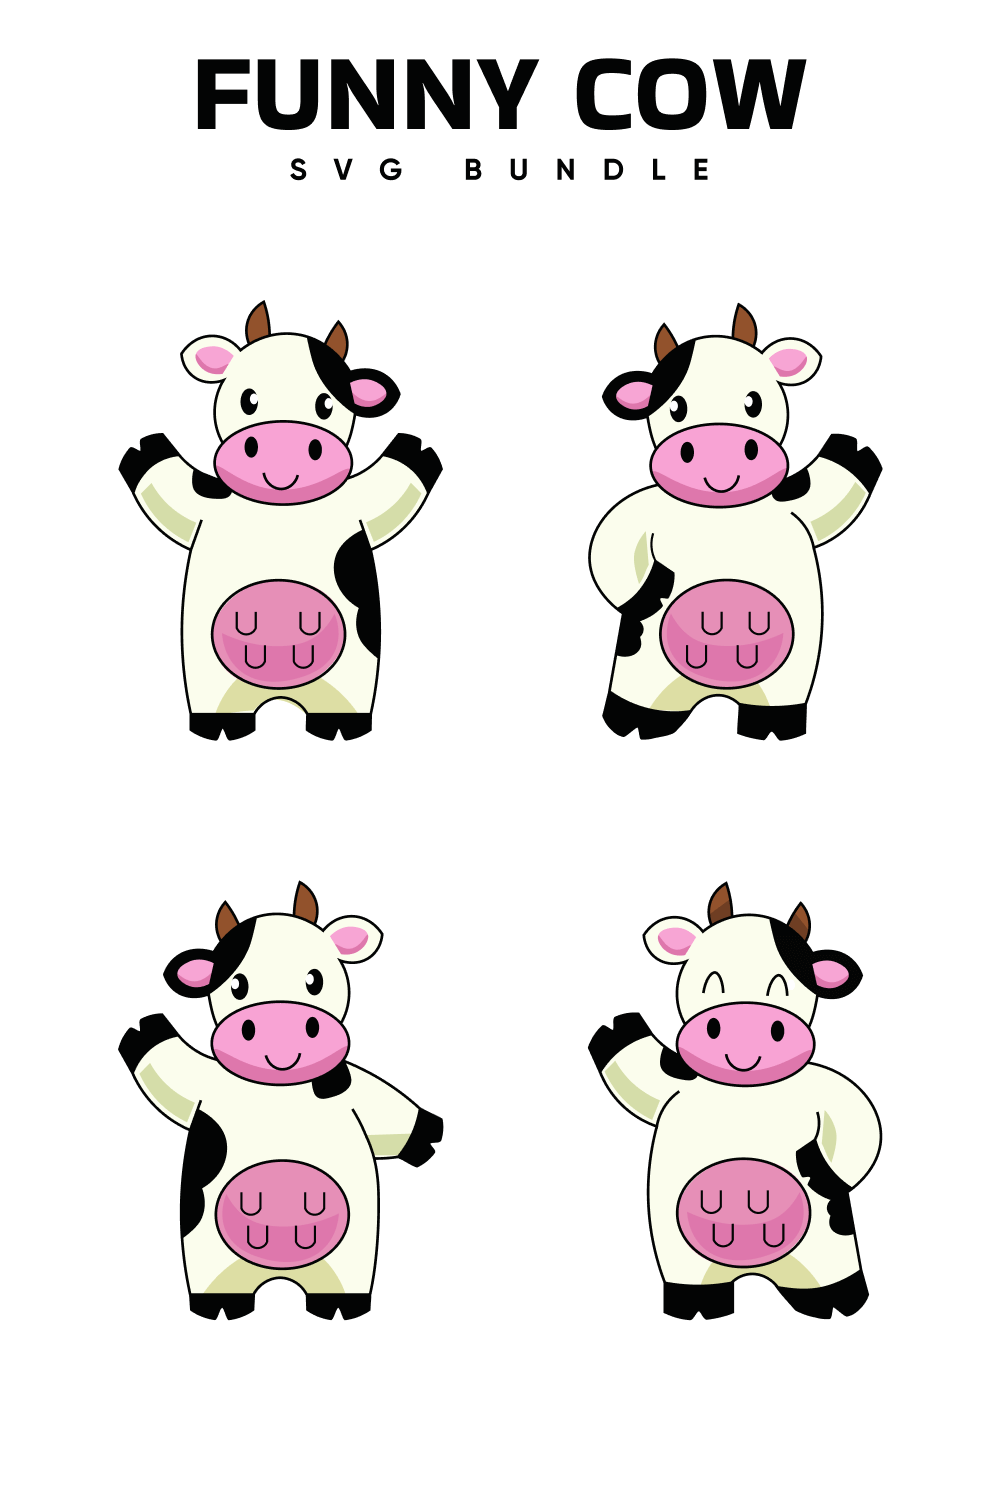 Picture of a cow with four different expressions.